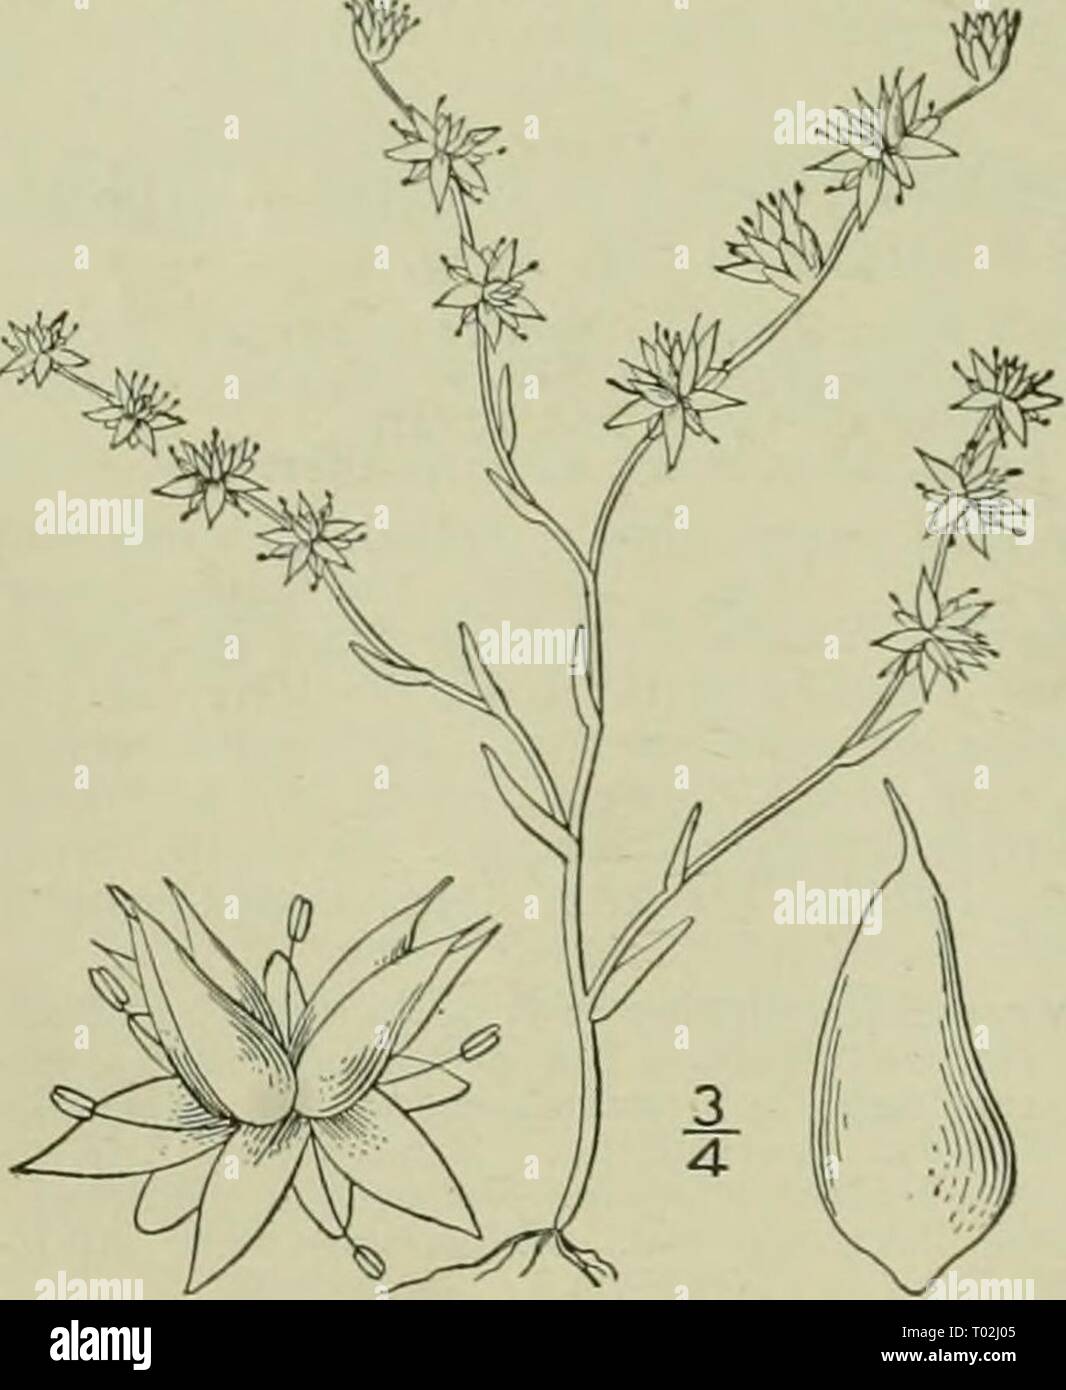 An illustrated flora of the northern United States, Canada and the British possessions : from Newfoundland to the parallel of the southern boundary of Virginia and from the Atlantic Ocean westward to the 102nd meridian . ed2illustratedflo02brit Year: 1913  ^=;r^    4. Sedum Nuttallianum Raf. Nuttall's Stonecrop. Fig. 2137. Sedum Nullallia 1832. Sedum Torreyi Don. Card. Diet. 3: 121. 1834. Sedum sfarsiftorum Nutt.; T. & G. Fl. N. A. i: 559. 1840. Annual, low, tufted, glabrous,  2-3' high. Leaves alternate, scattered, linear-oblong, teretish, sessile, entire, 2'-6' long; cyme 2- S-forked, its br Stock Photo